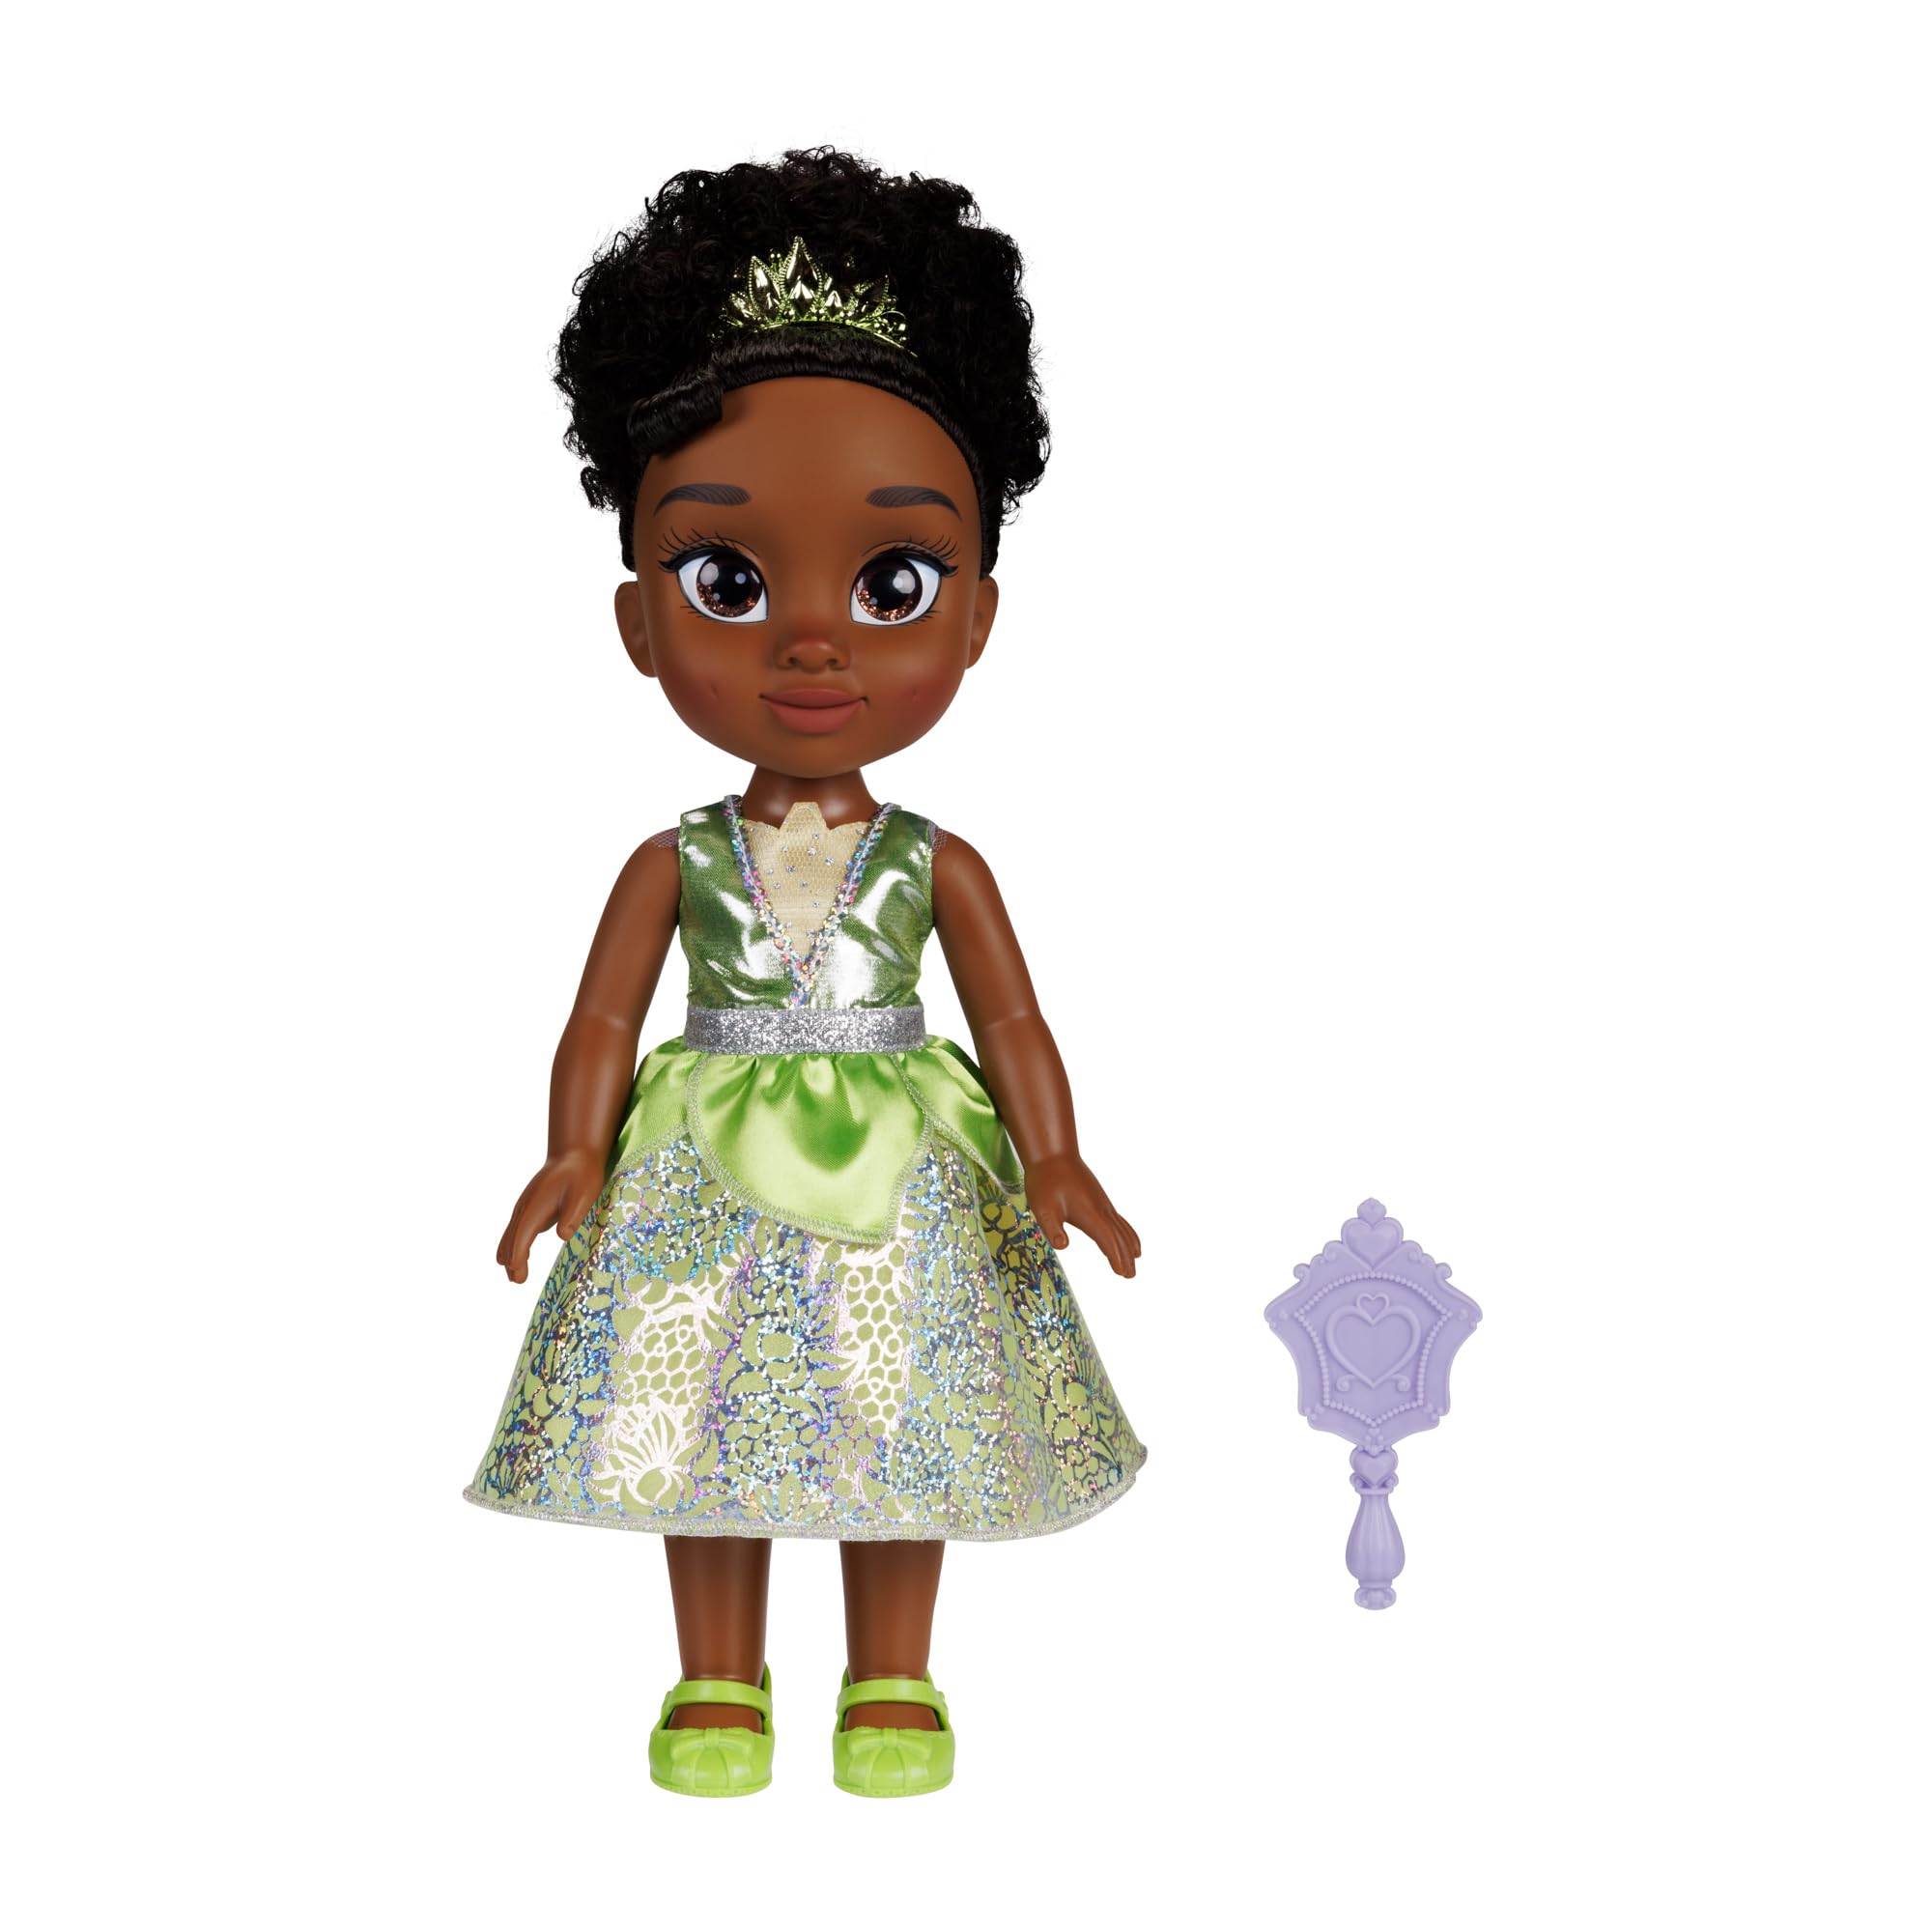 Disney Princess Disney 100 My Friend Tiana Doll 14 inch Tall Includes Removable Outfit and Tiara